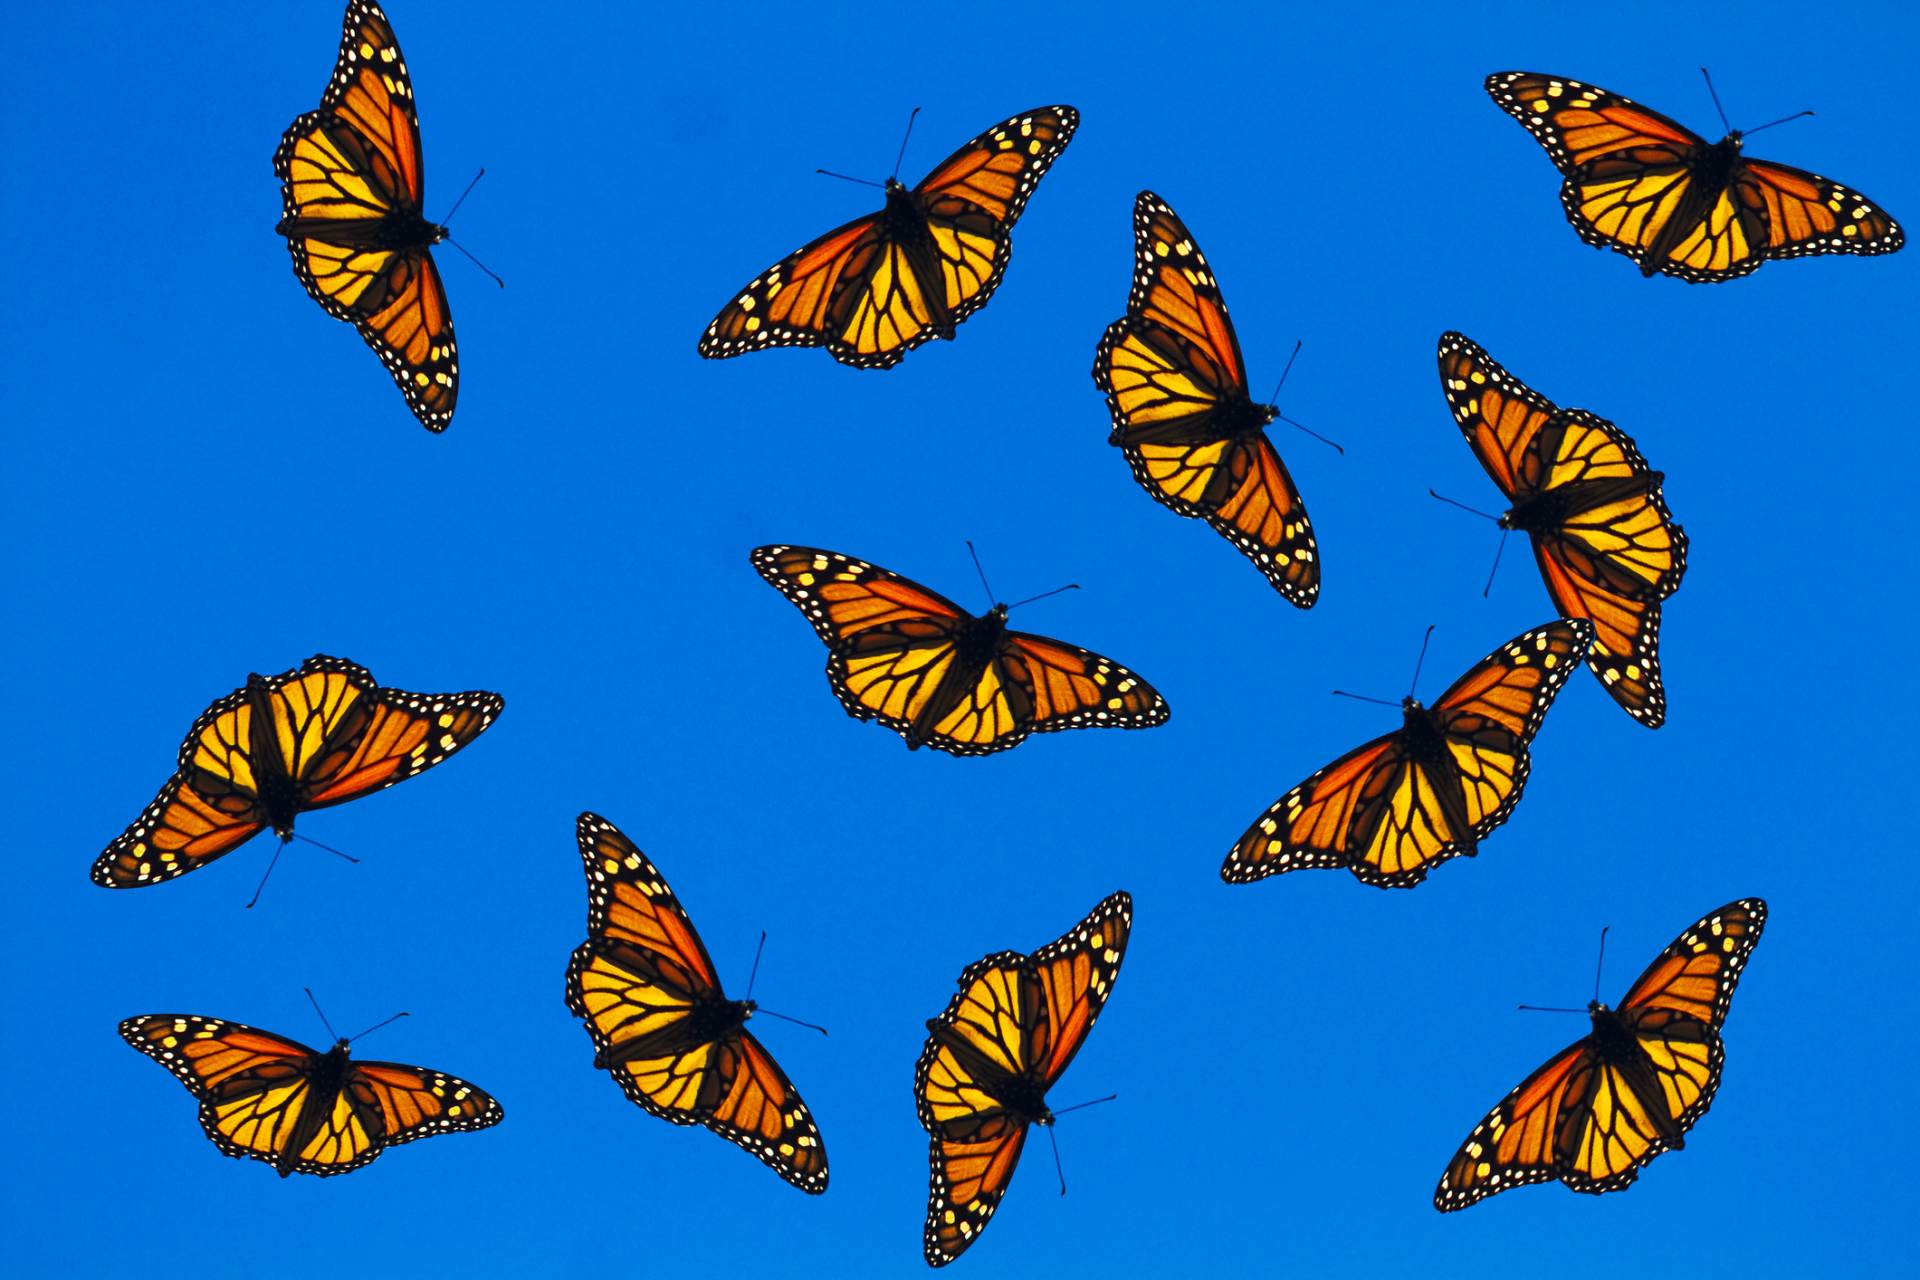 A number of brightly colored monarch butterflies in hues of orange and yellow against a bright blue backdrop